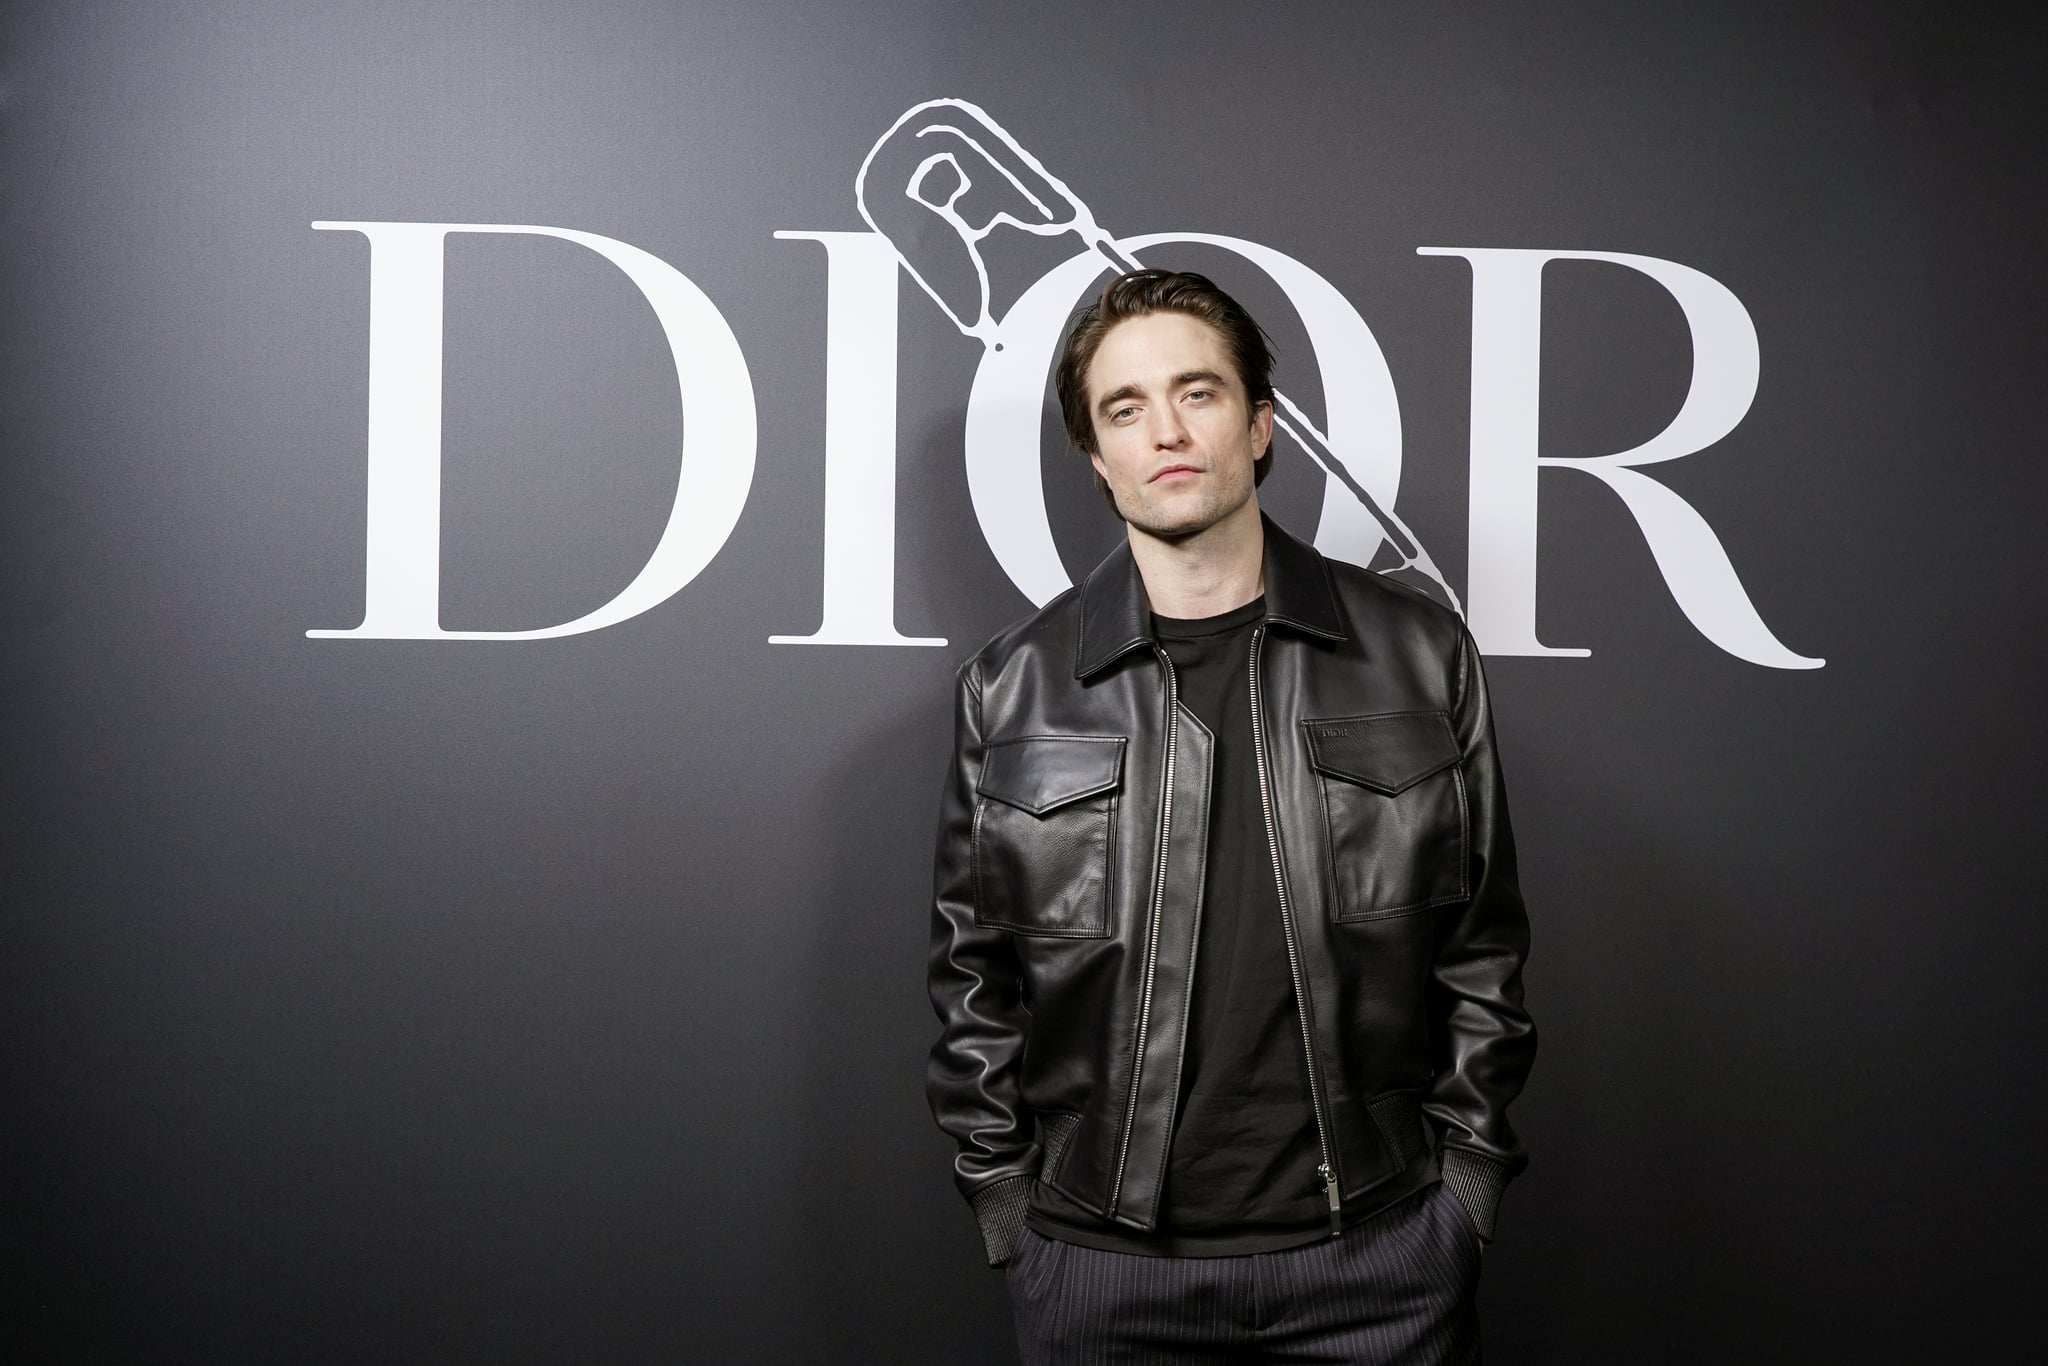 PARIS, FRANCE - JANUARY 17: Robert Pattinson attends the Dior Homme Menswear Fall/Winter 2020-2021 show as part of Paris Fashion Week on January 17, 2020 in Paris, France. (Photo by Francois Durand for Dior/Getty Images)